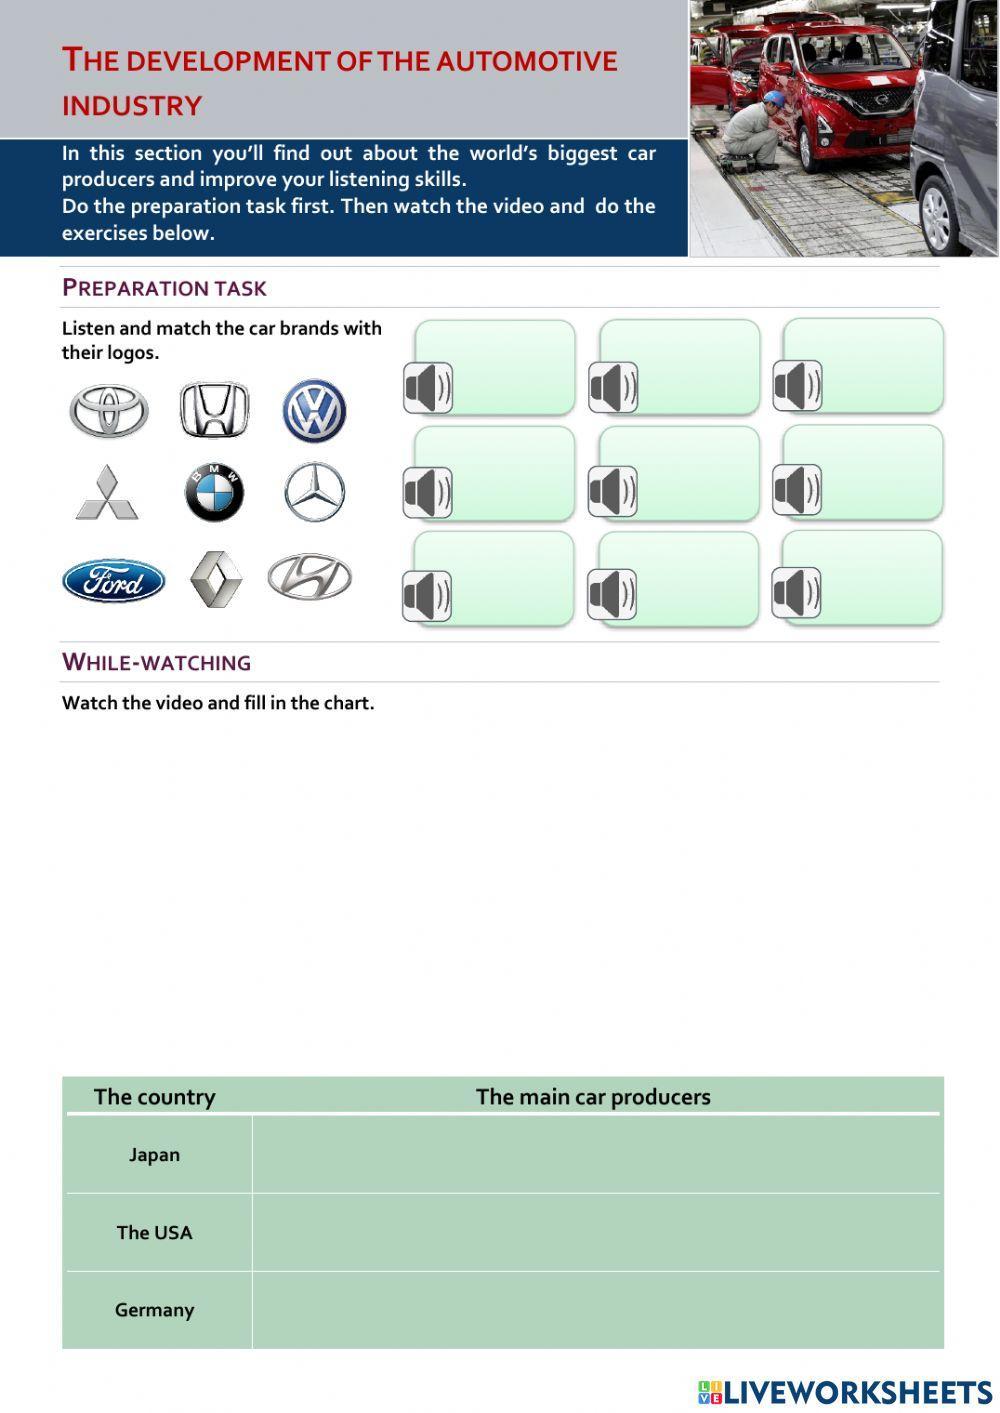 The development of the automotive industry